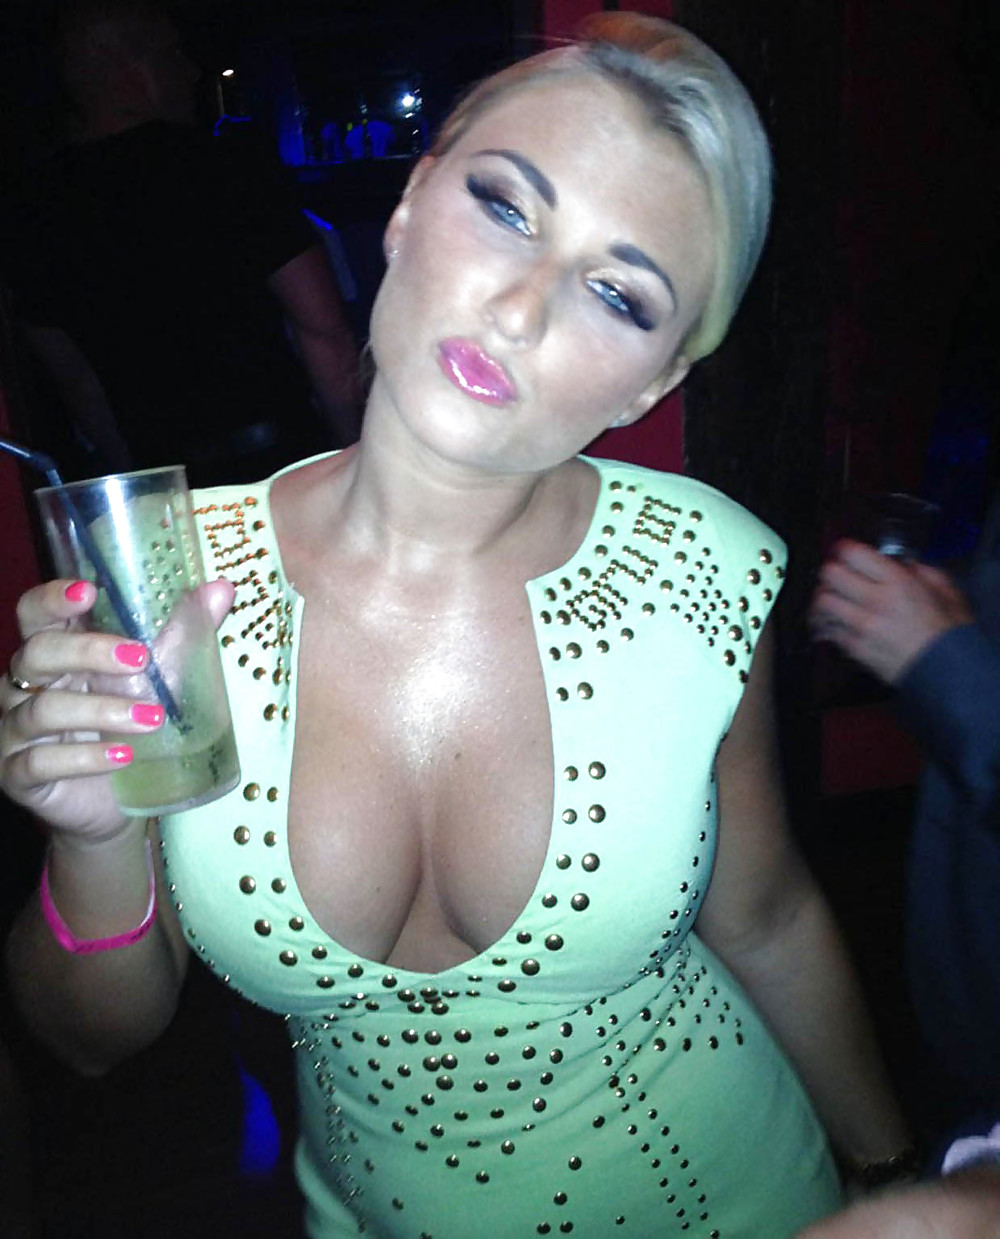 Billie Faiers - Is my Roughly Lady